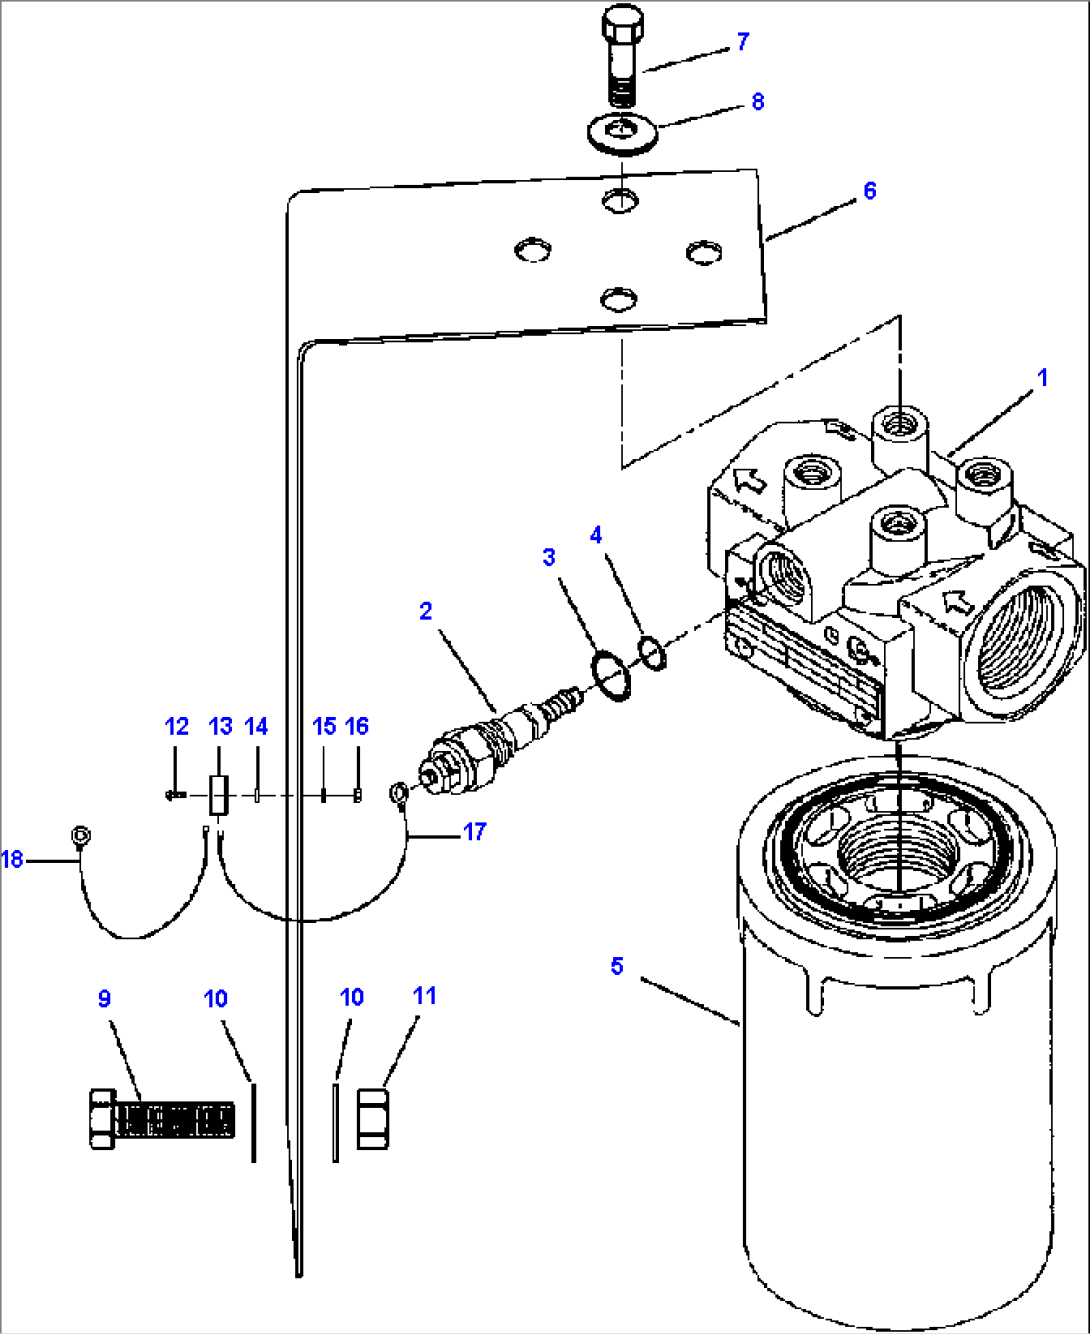 FIG. F5180-01A2 CONVERTER/DIFFERENTIAL OIL FILTER